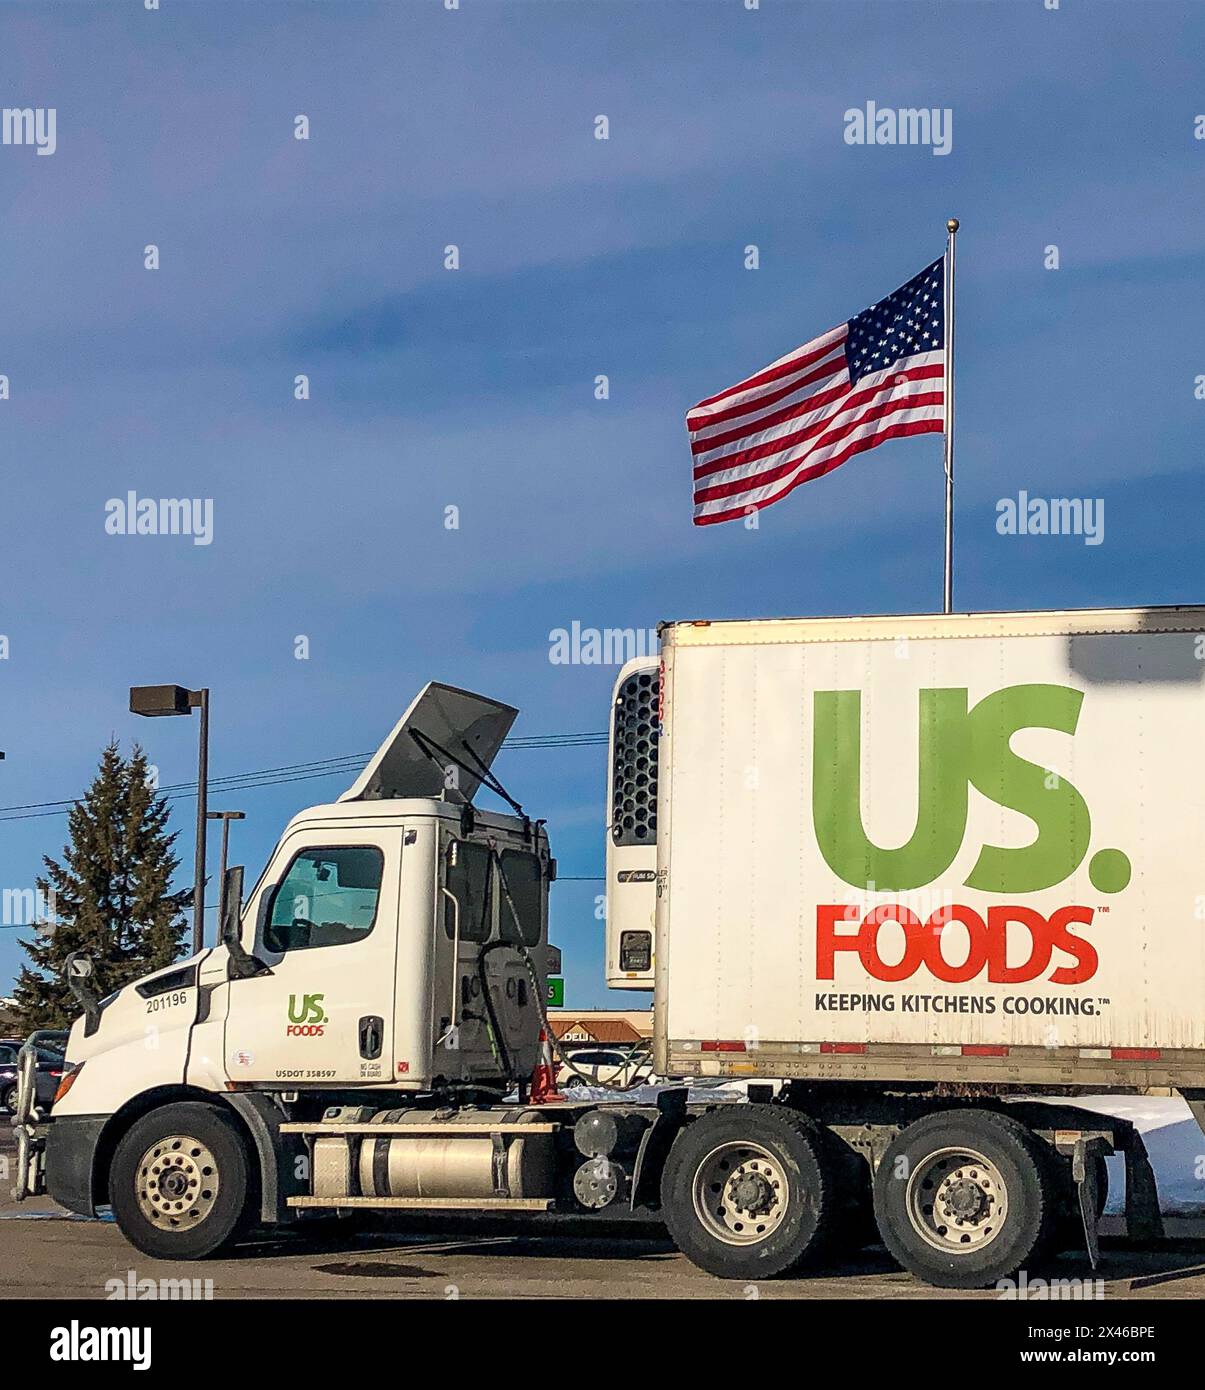 Semi truck hauling cargo for US Foods on a street, with an American flag in background seen above the trailer. Stock Photo